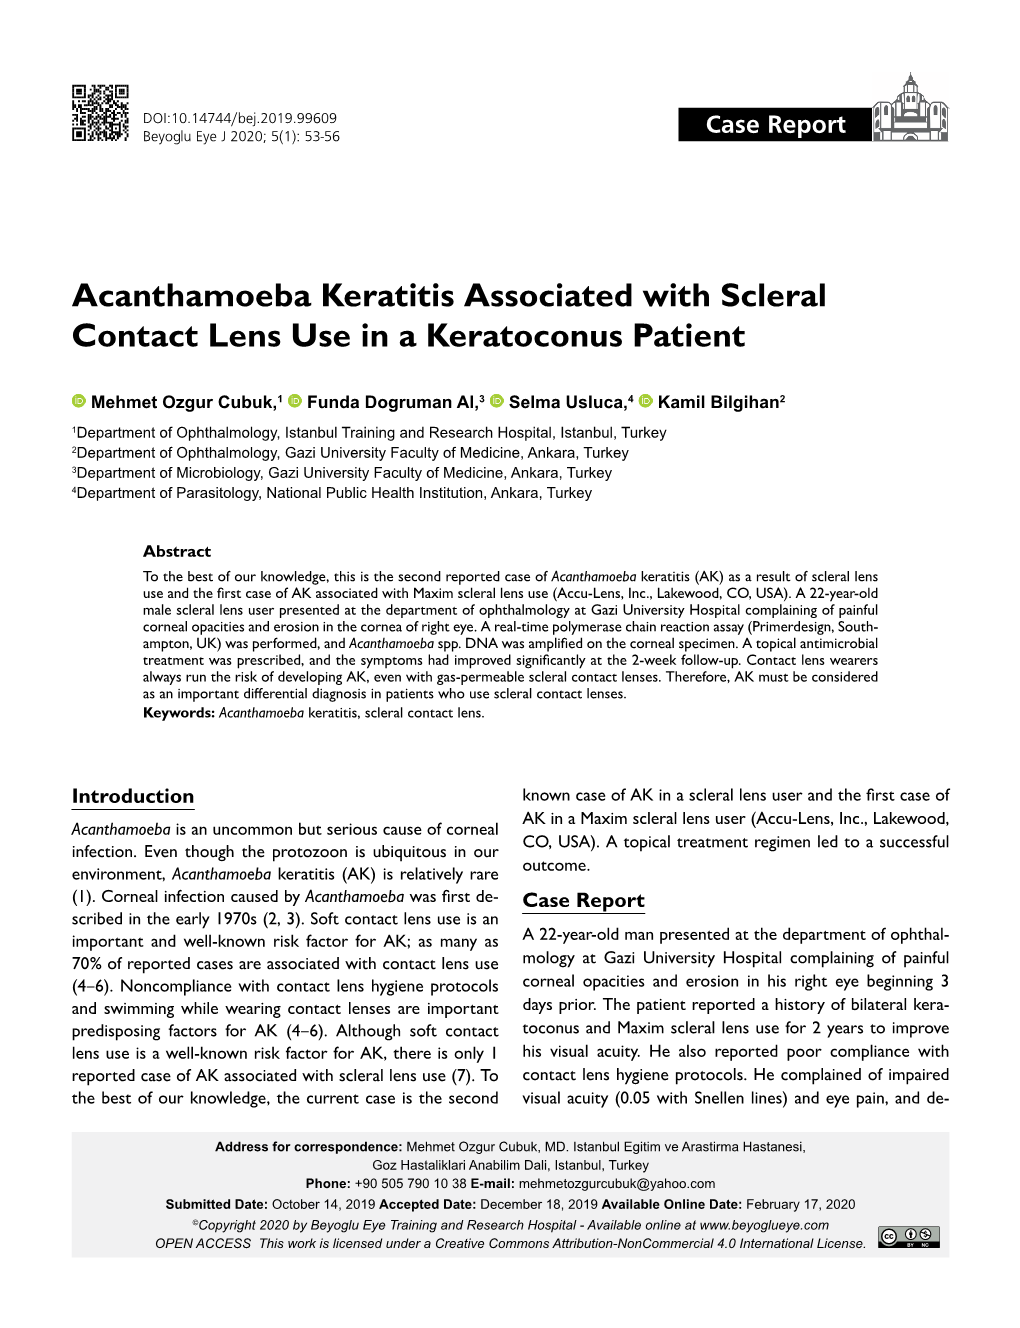 Acanthamoeba Keratitis Associated with Scleral Contact Lens Use in a Keratoconus Patient